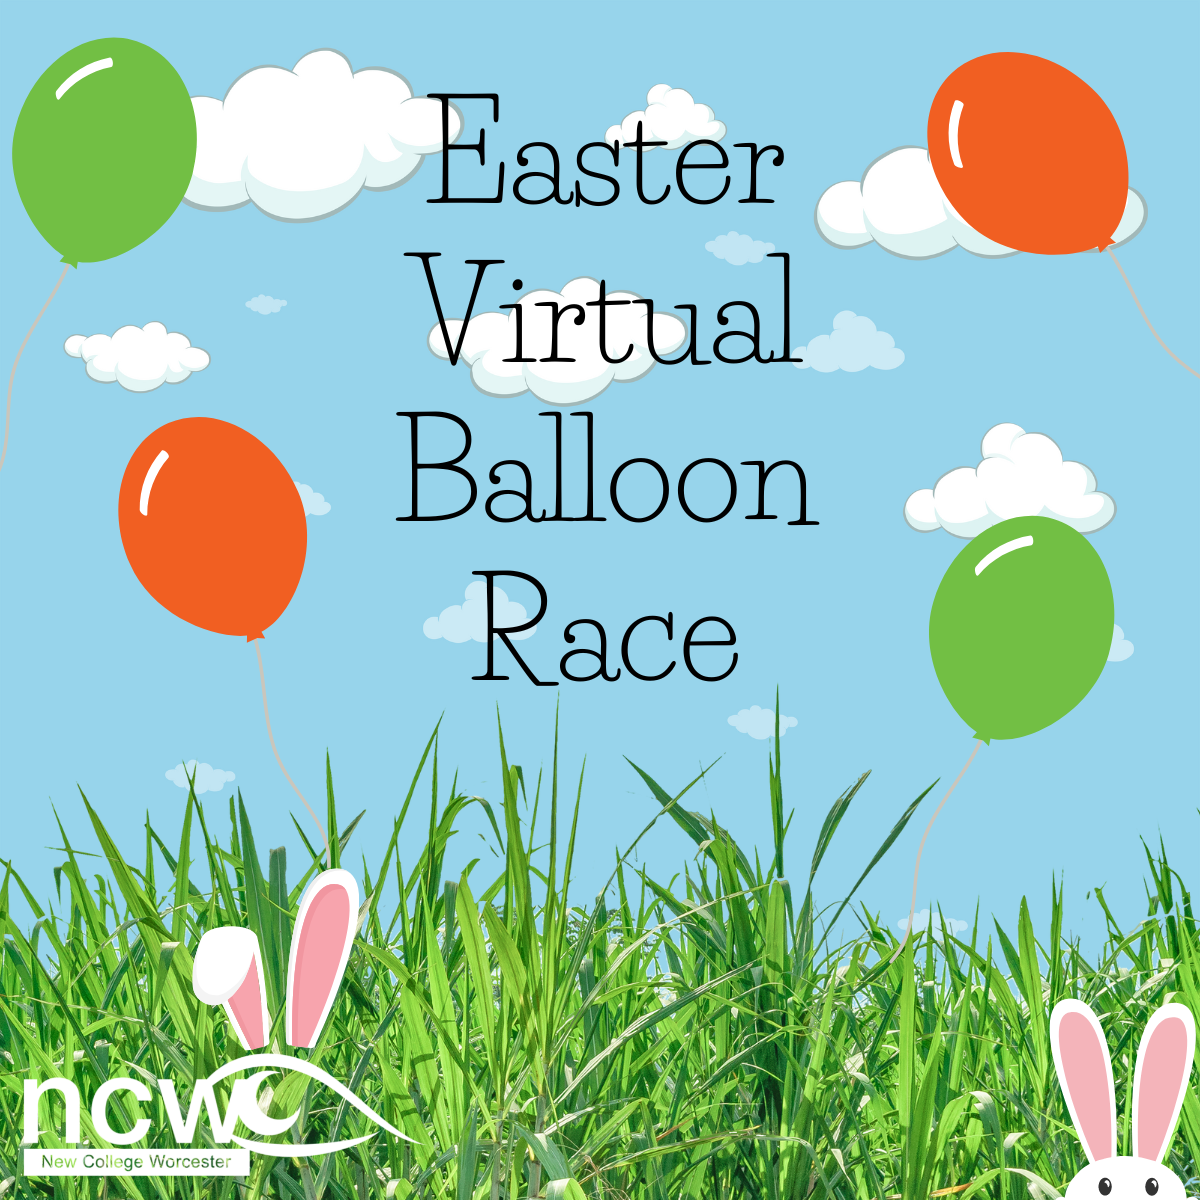 Promo image for the Easter Balloon Race. There is a blue sky with clouds and balloons. There is an Easter bunny peeking out from grass at the bottom of the screen and the NCW logo with bunny ears over the 'W'